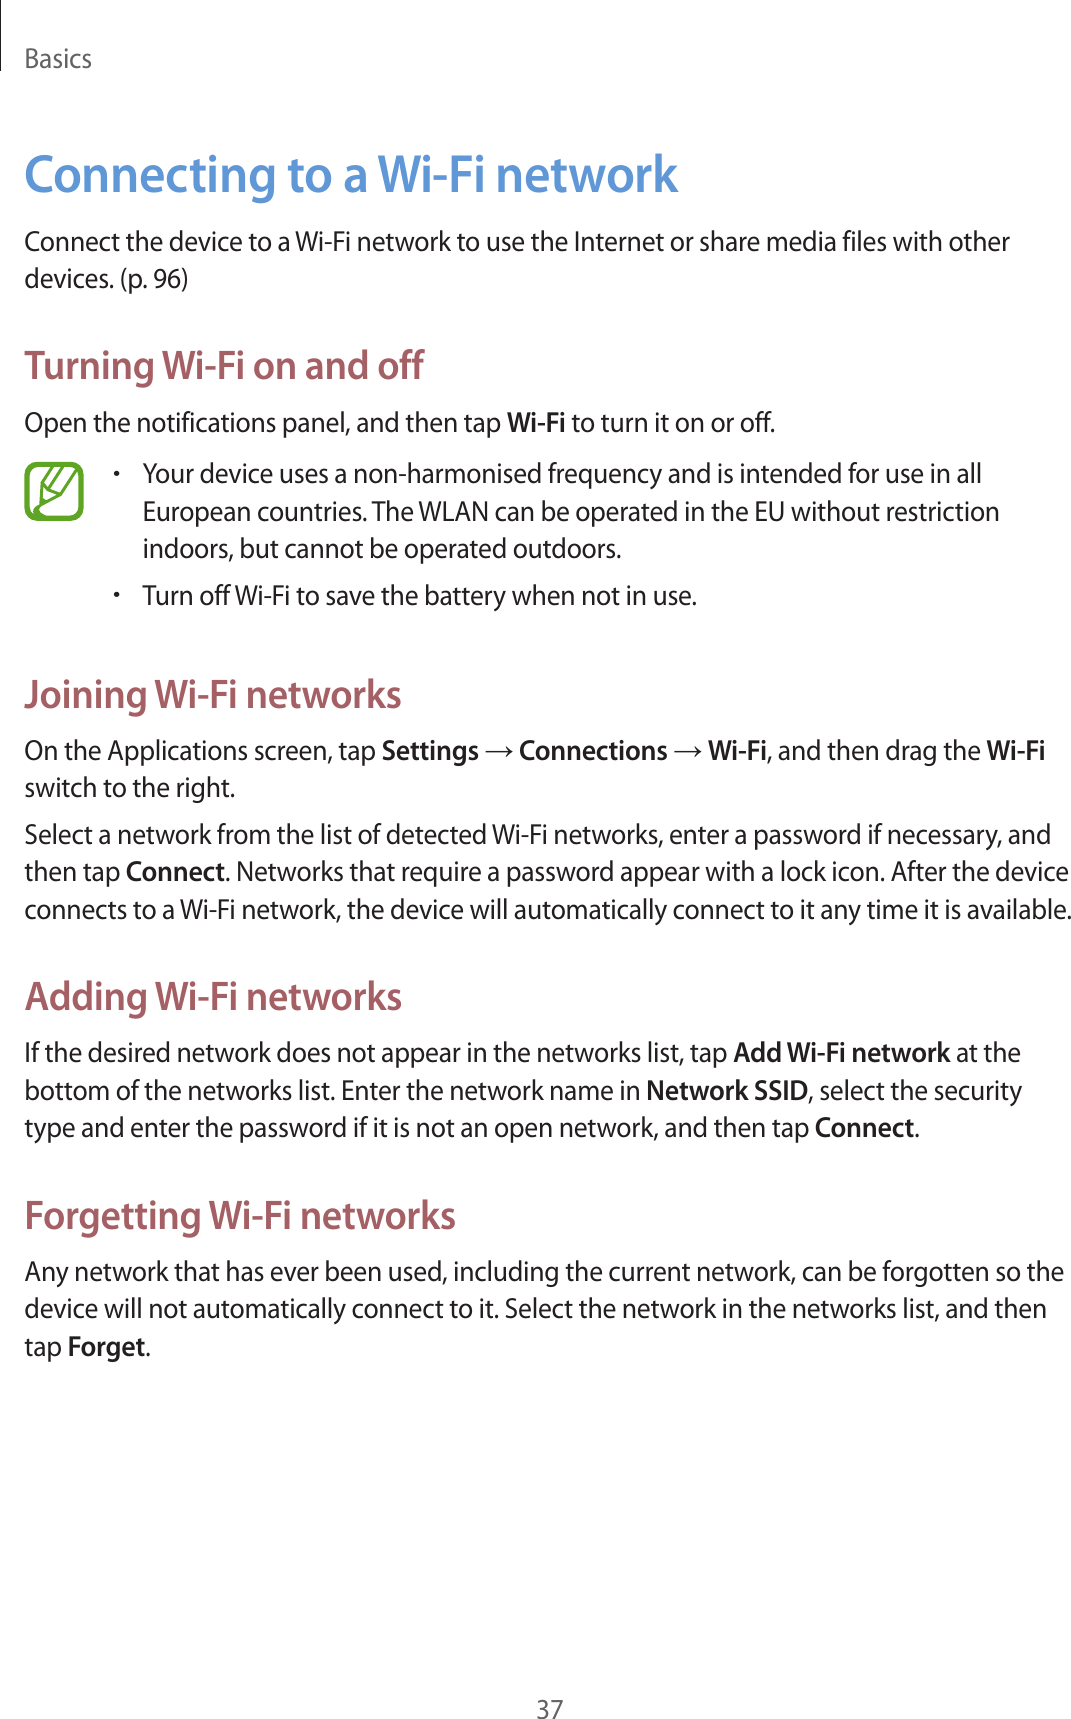 Basics37Connecting to a Wi-Fi networkConnect the device to a Wi-Fi network to use the Internet or share media files with other devices. (p. 96)Turning Wi-Fi on and offOpen the notifications panel, and then tap Wi-Fi to turn it on or off.•Your device uses a non-harmonised frequency and is intended for use in all European countries. The WLAN can be operated in the EU without restriction indoors, but cannot be operated outdoors.•Turn off Wi-Fi to save the battery when not in use.Joining Wi-Fi networksOn the Applications screen, tap Settings → Connections → Wi-Fi, and then drag the Wi-Fi switch to the right.Select a network from the list of detected Wi-Fi networks, enter a password if necessary, and then tap Connect. Networks that require a password appear with a lock icon. After the device connects to a Wi-Fi network, the device will automatically connect to it any time it is available.Adding Wi-Fi networksIf the desired network does not appear in the networks list, tap Add Wi-Fi network at the bottom of the networks list. Enter the network name in Network SSID, select the security type and enter the password if it is not an open network, and then tap Connect.Forgetting Wi-Fi networksAny network that has ever been used, including the current network, can be forgotten so the device will not automatically connect to it. Select the network in the networks list, and then tap Forget.